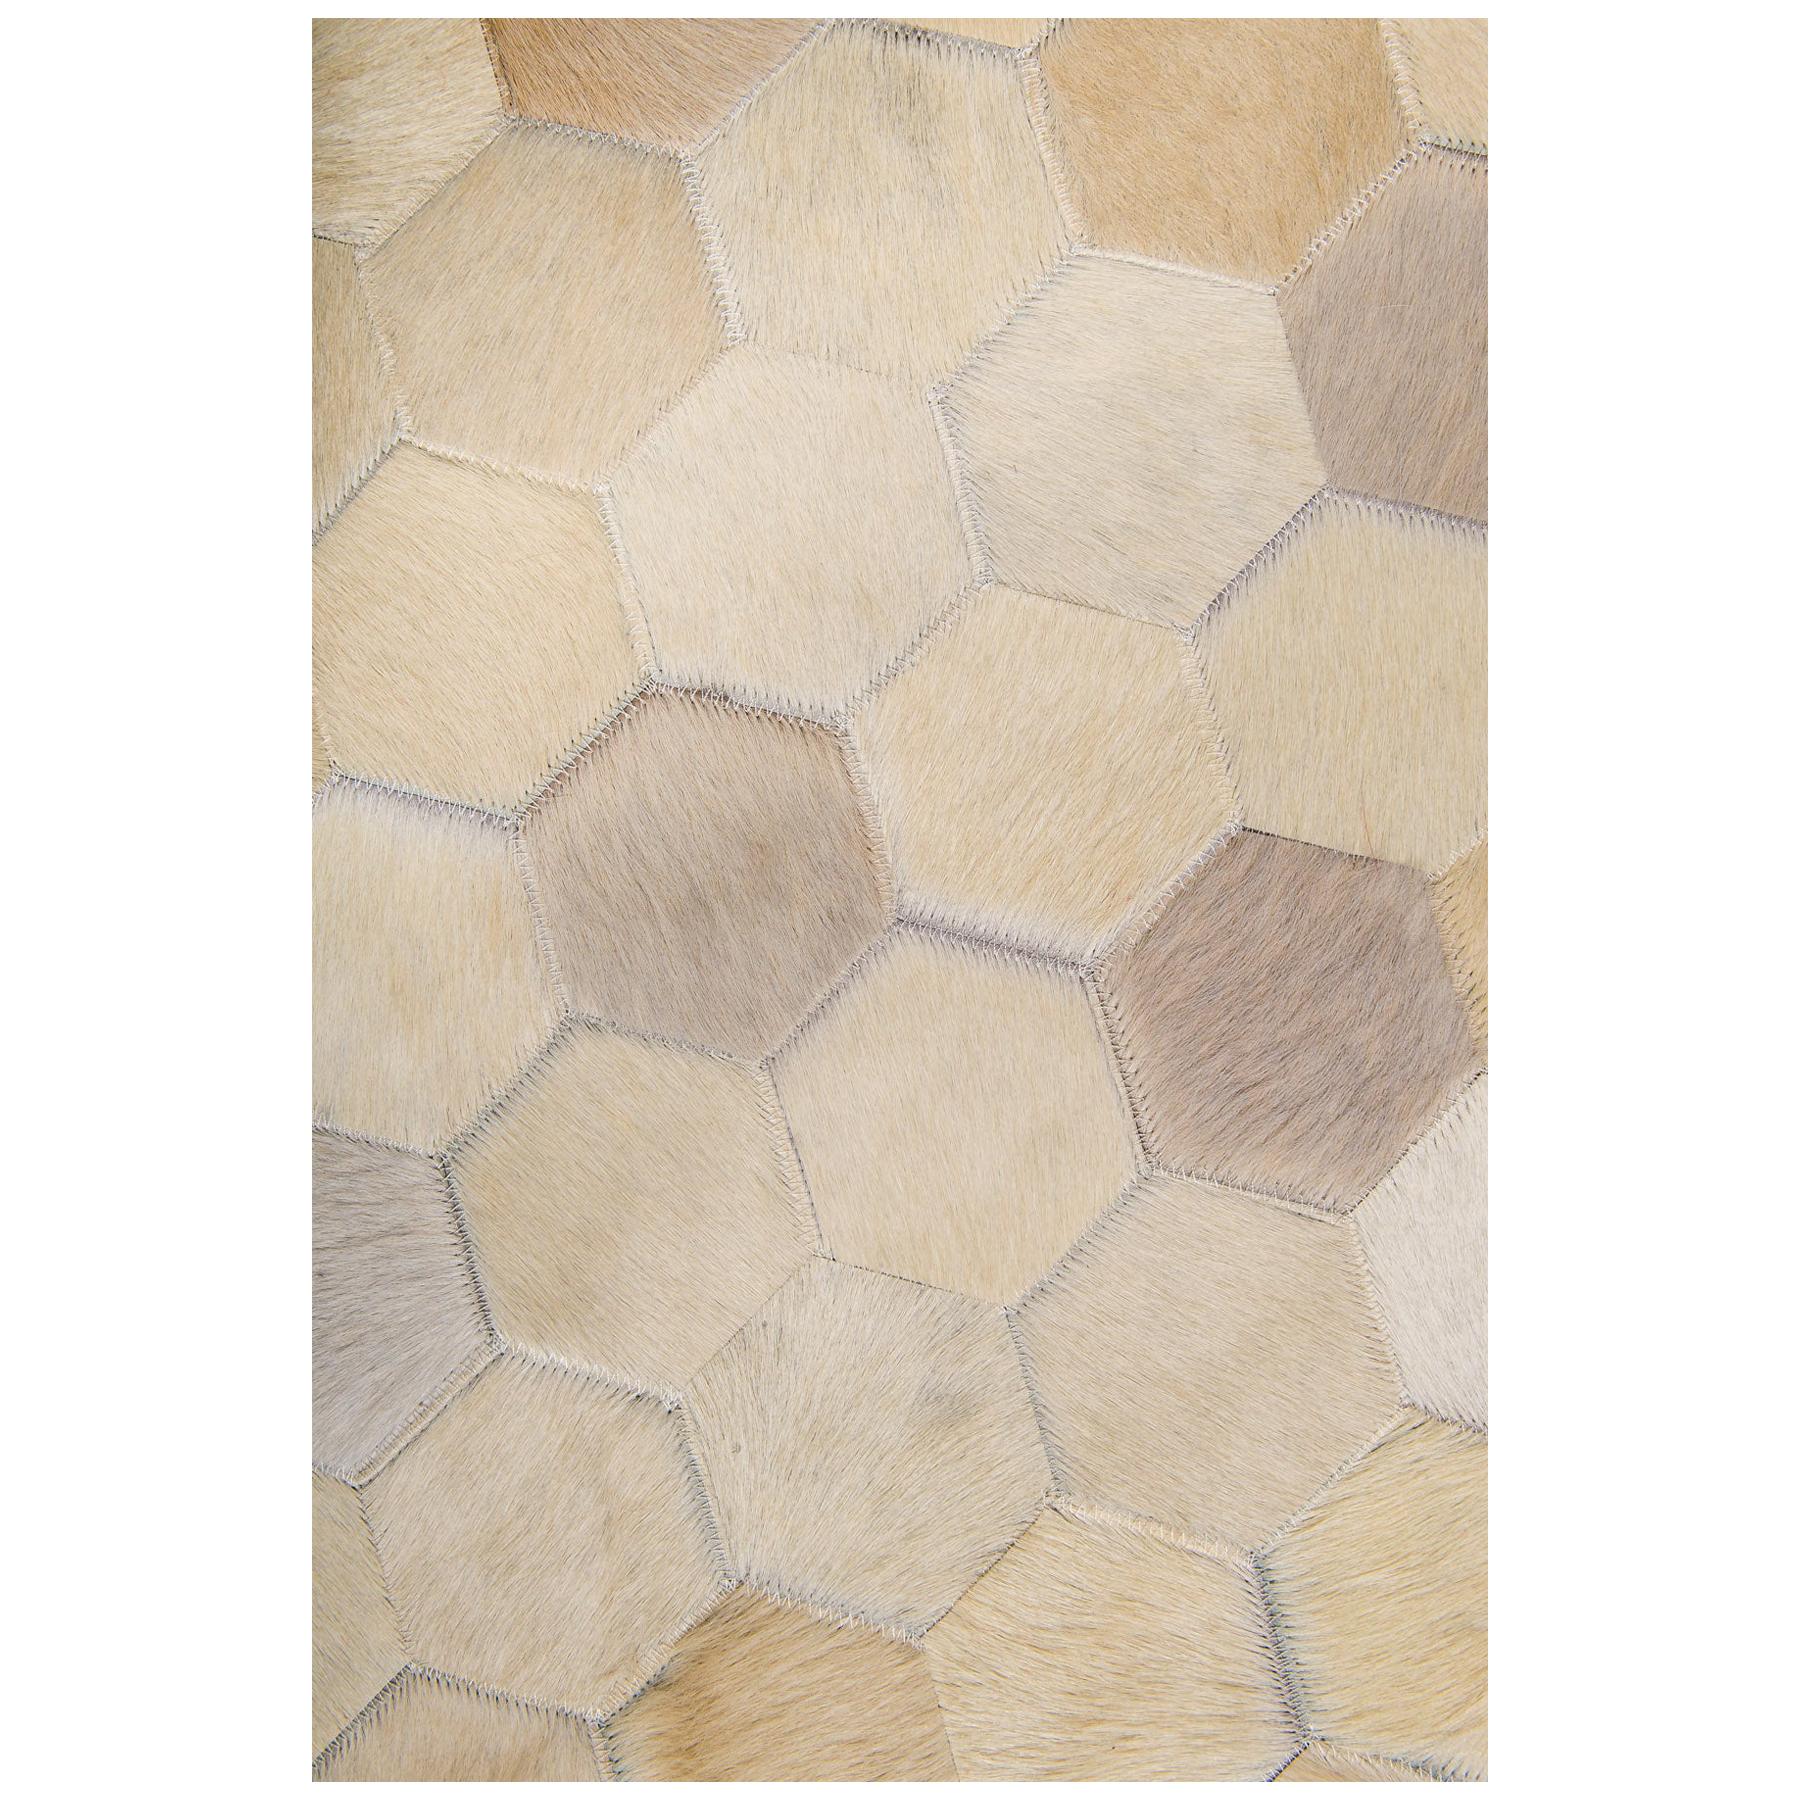 There’s no regrets from a long line of happy Art Hide customers who’ve made this stunning rug pride of place at home! Your future interior will be beautifully grounded with soft tones of luxurious cowhide, each varying slightly to form a natural